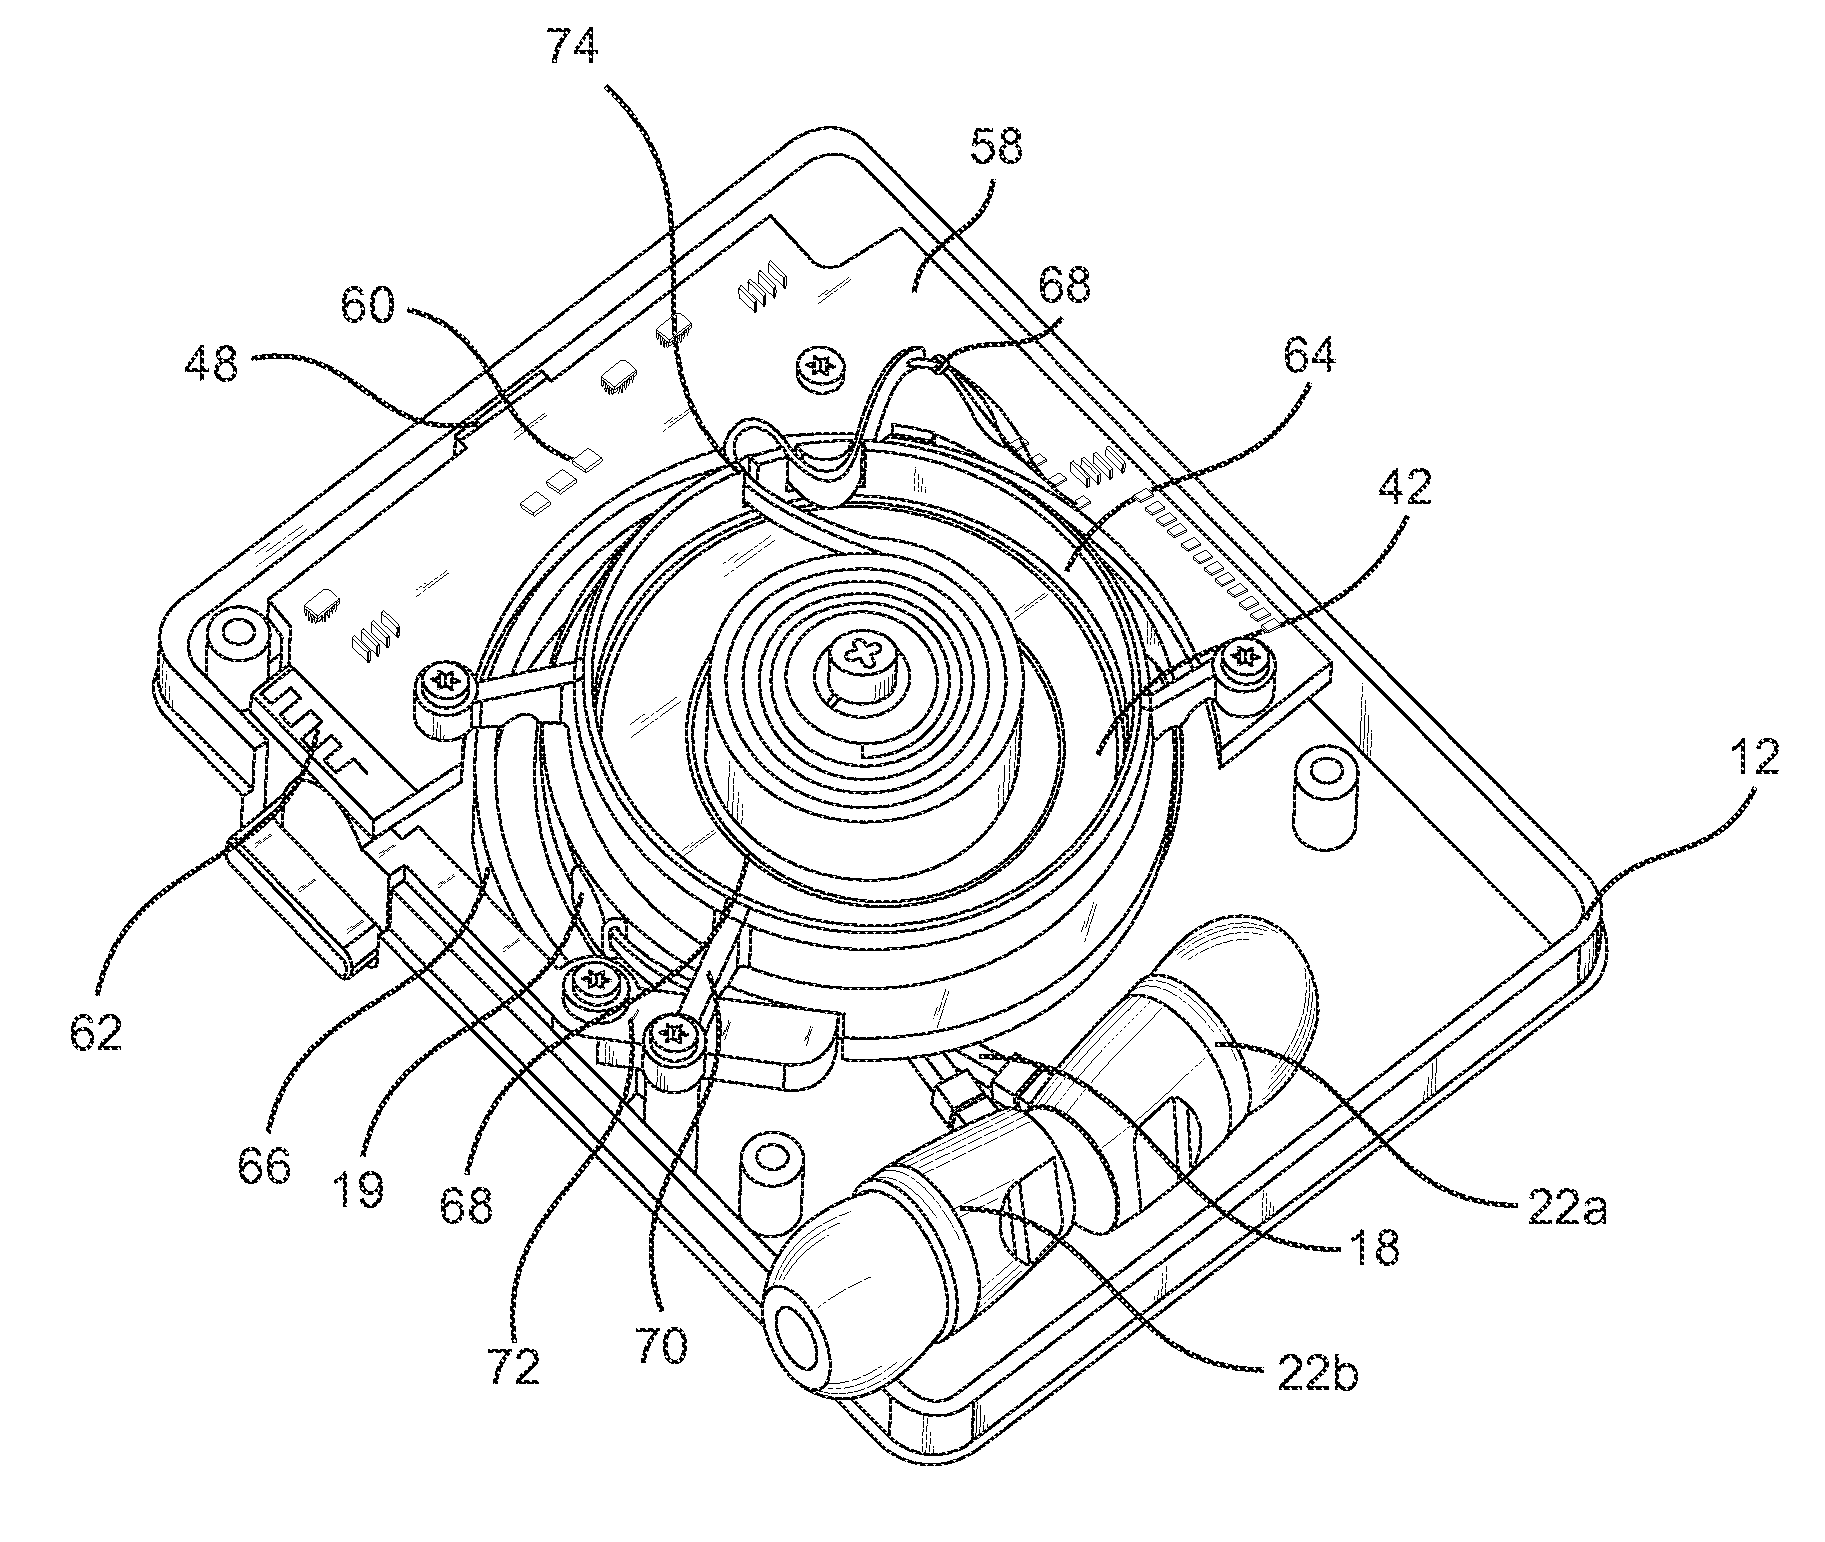 Ear Bud Retraction Module Having Optimal Microphone Placement